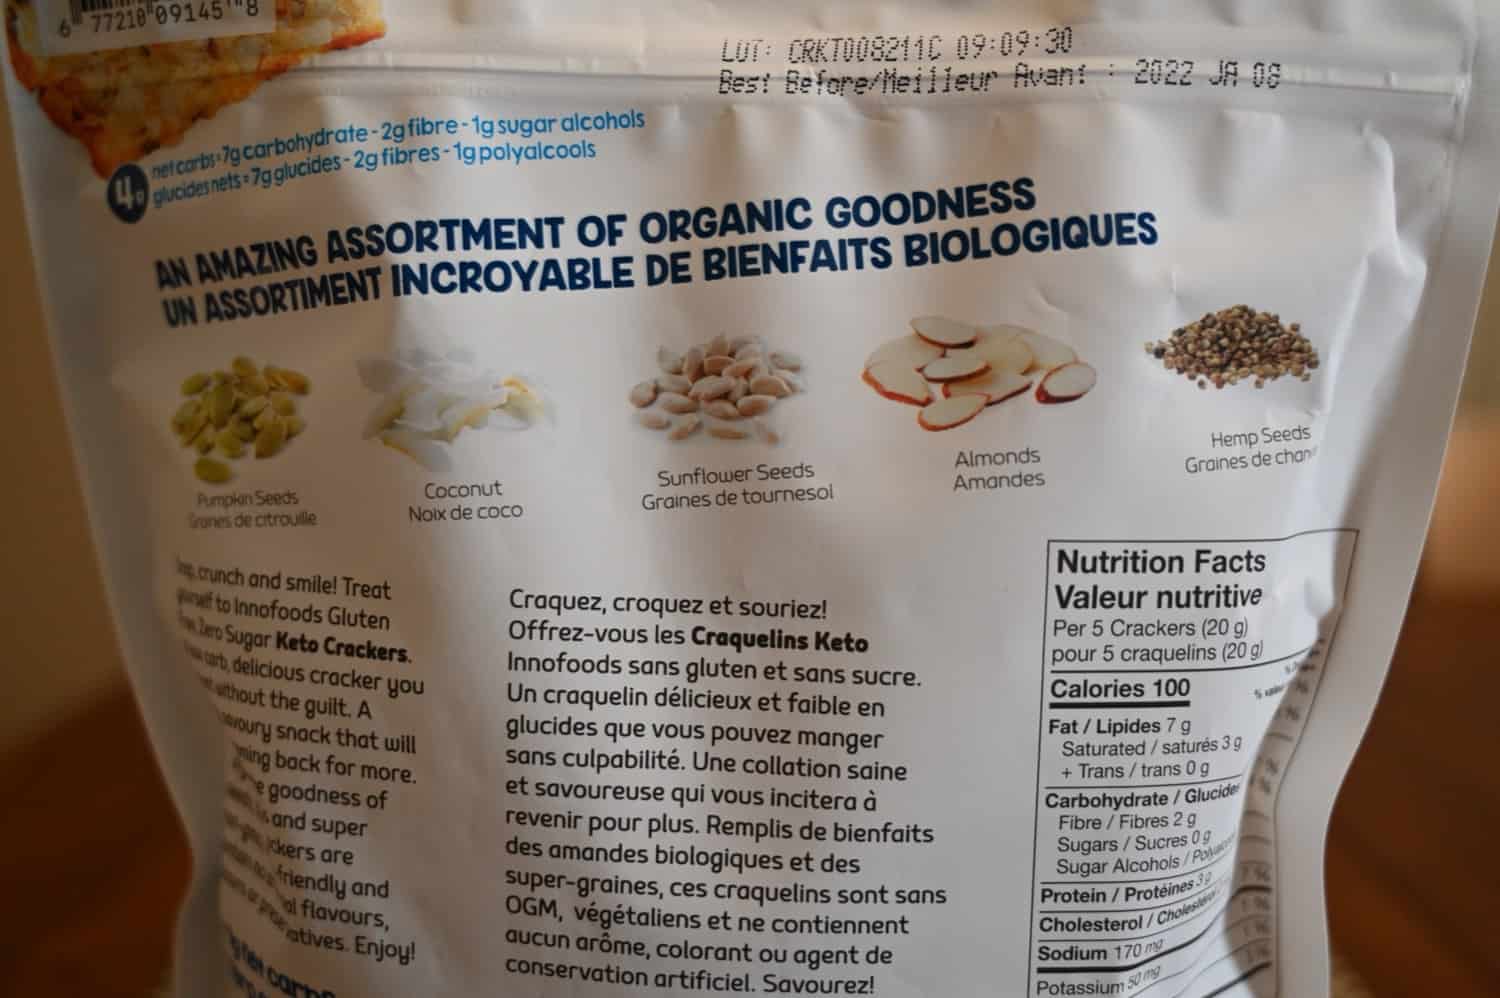 A close-up of the back of the bag showing some of the ingredients in the crackers.